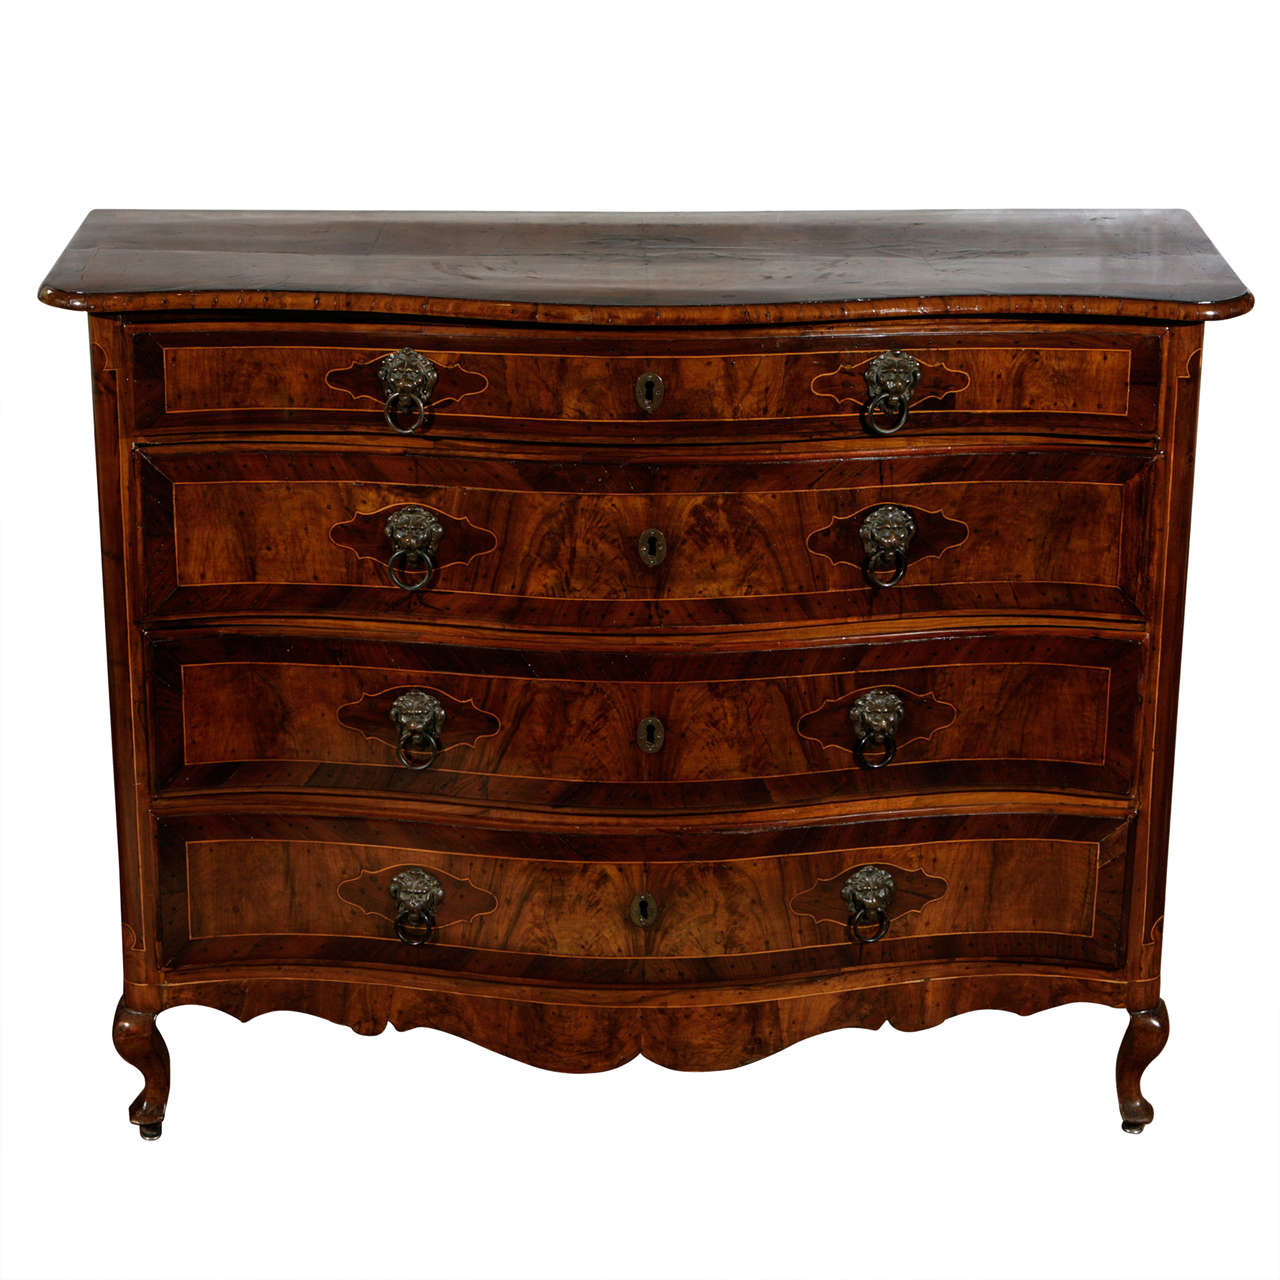 18th Century Italian Four Drawer Serpentine Front Commode